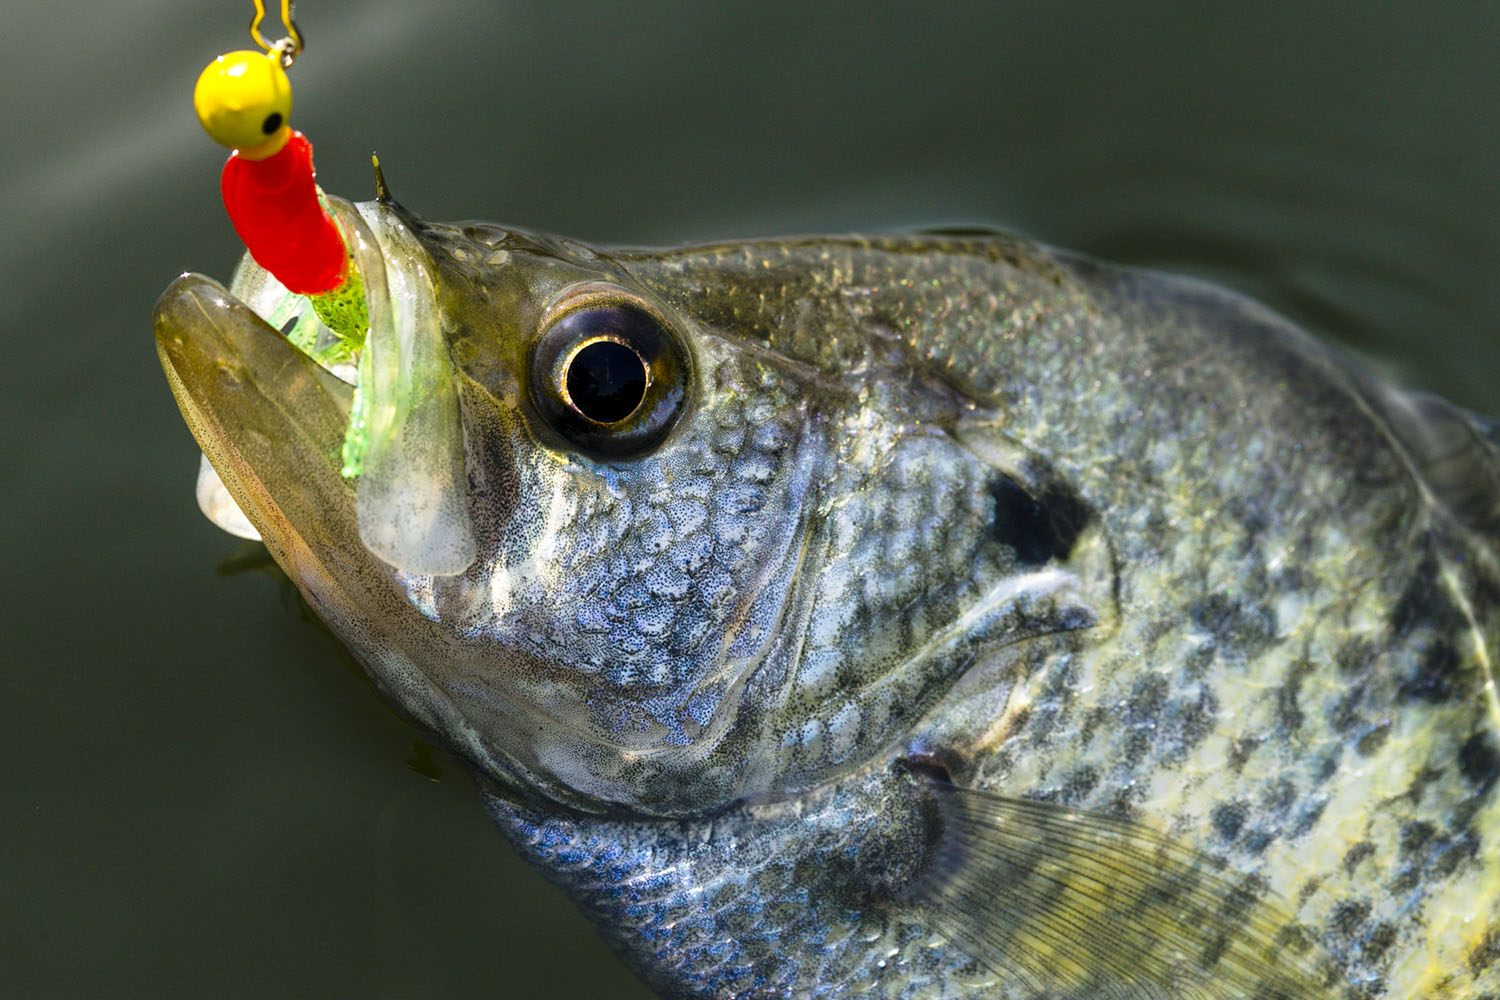 Read More: Get hooked on crappies this spring